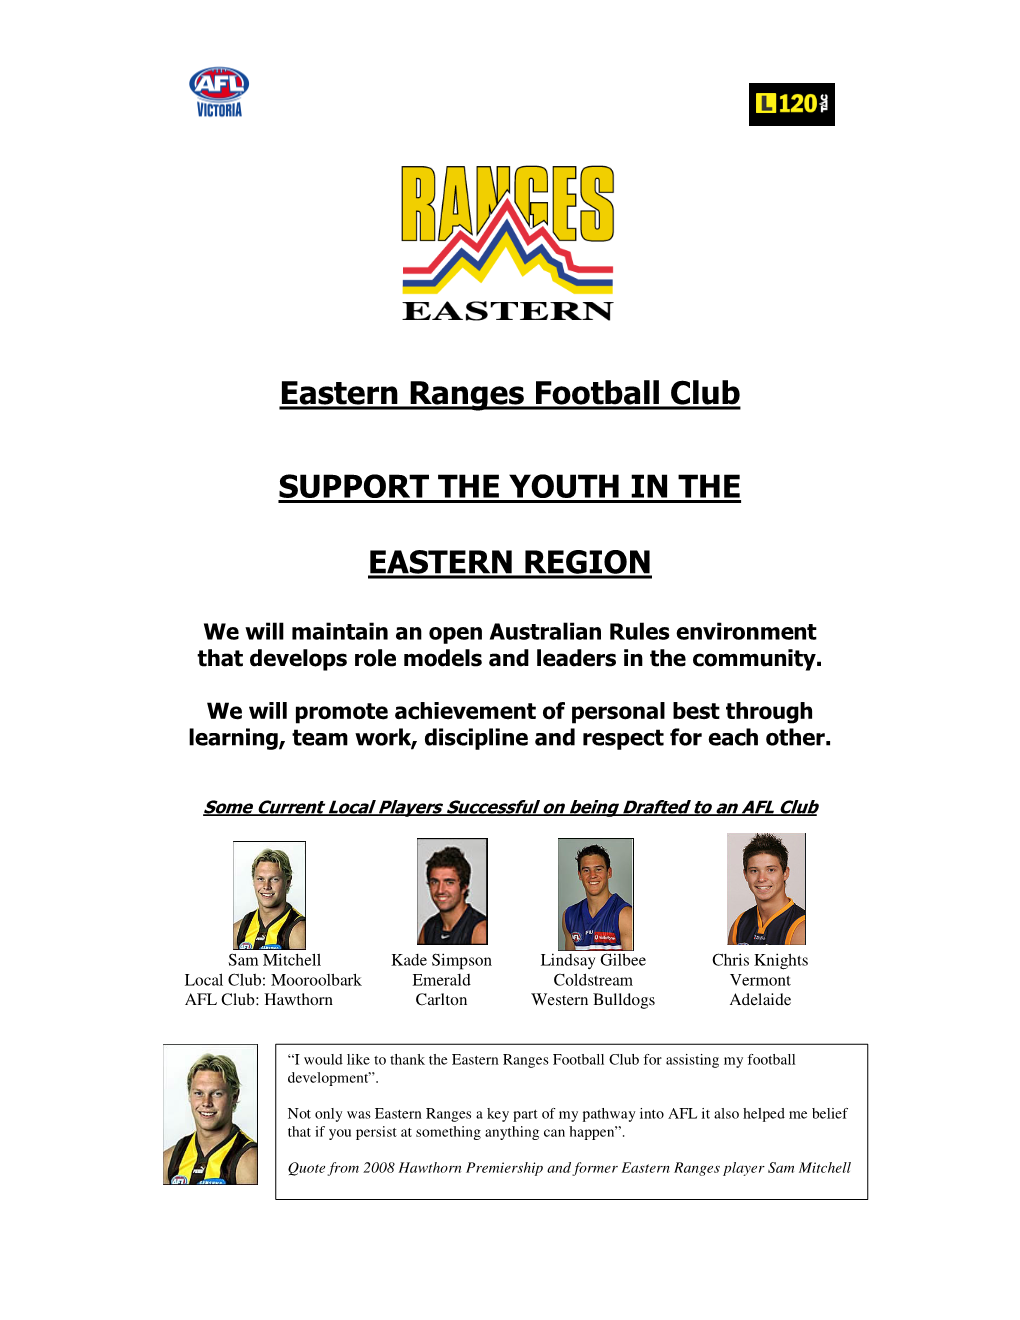 Eastern Ranges Football Club SUPPORT the YOUTH in THE